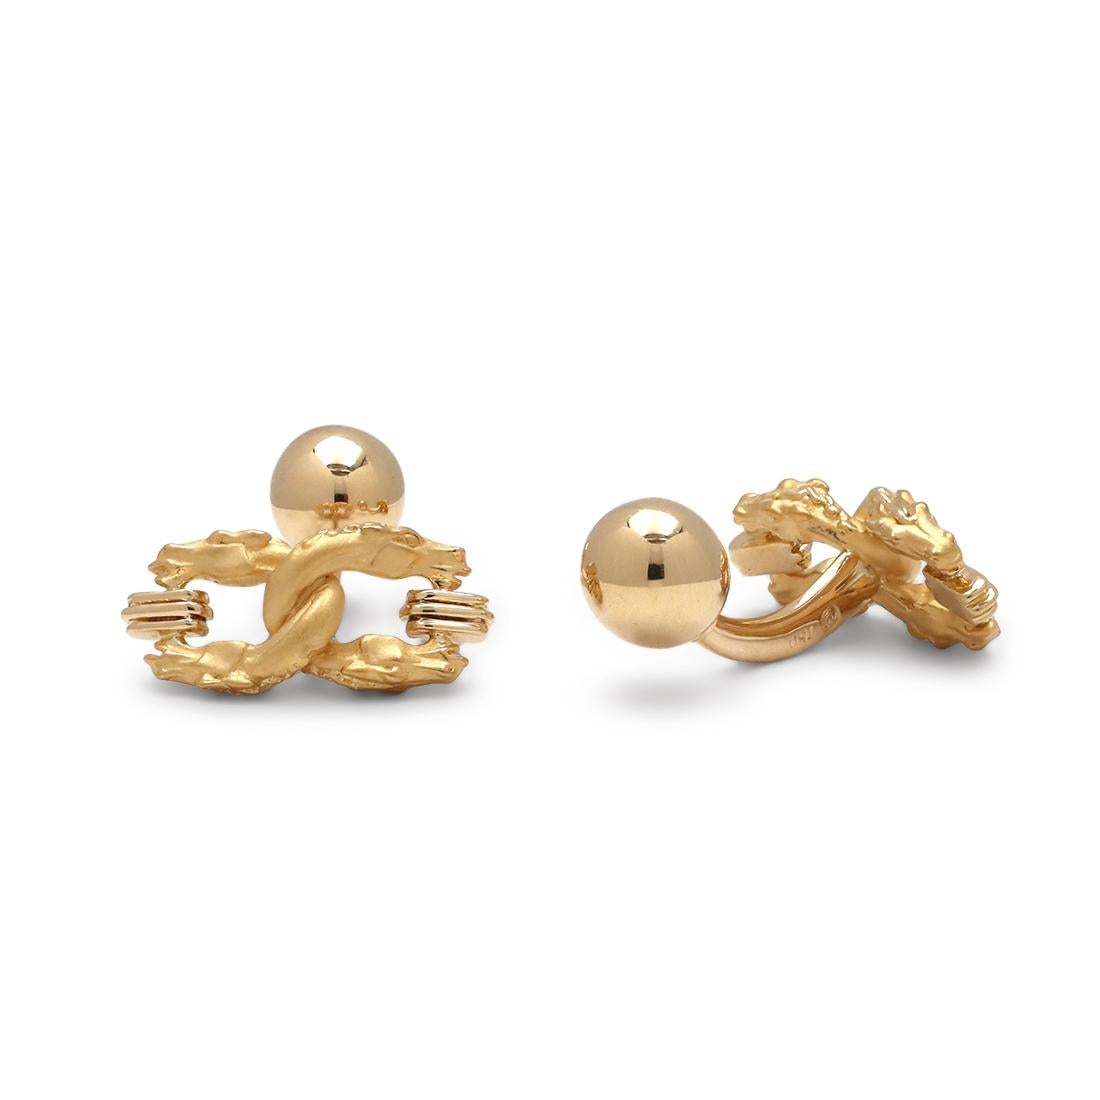 Authentic Carrera Y Carrera cufflinks crafted in 18 karat yellow gold. Each cufflink features 2 interlocking double-headed dragons. The dragon motif measures 17.7mm in length and 8.1mm in width. Signed CyC, 750 with serial number and hallmark. The